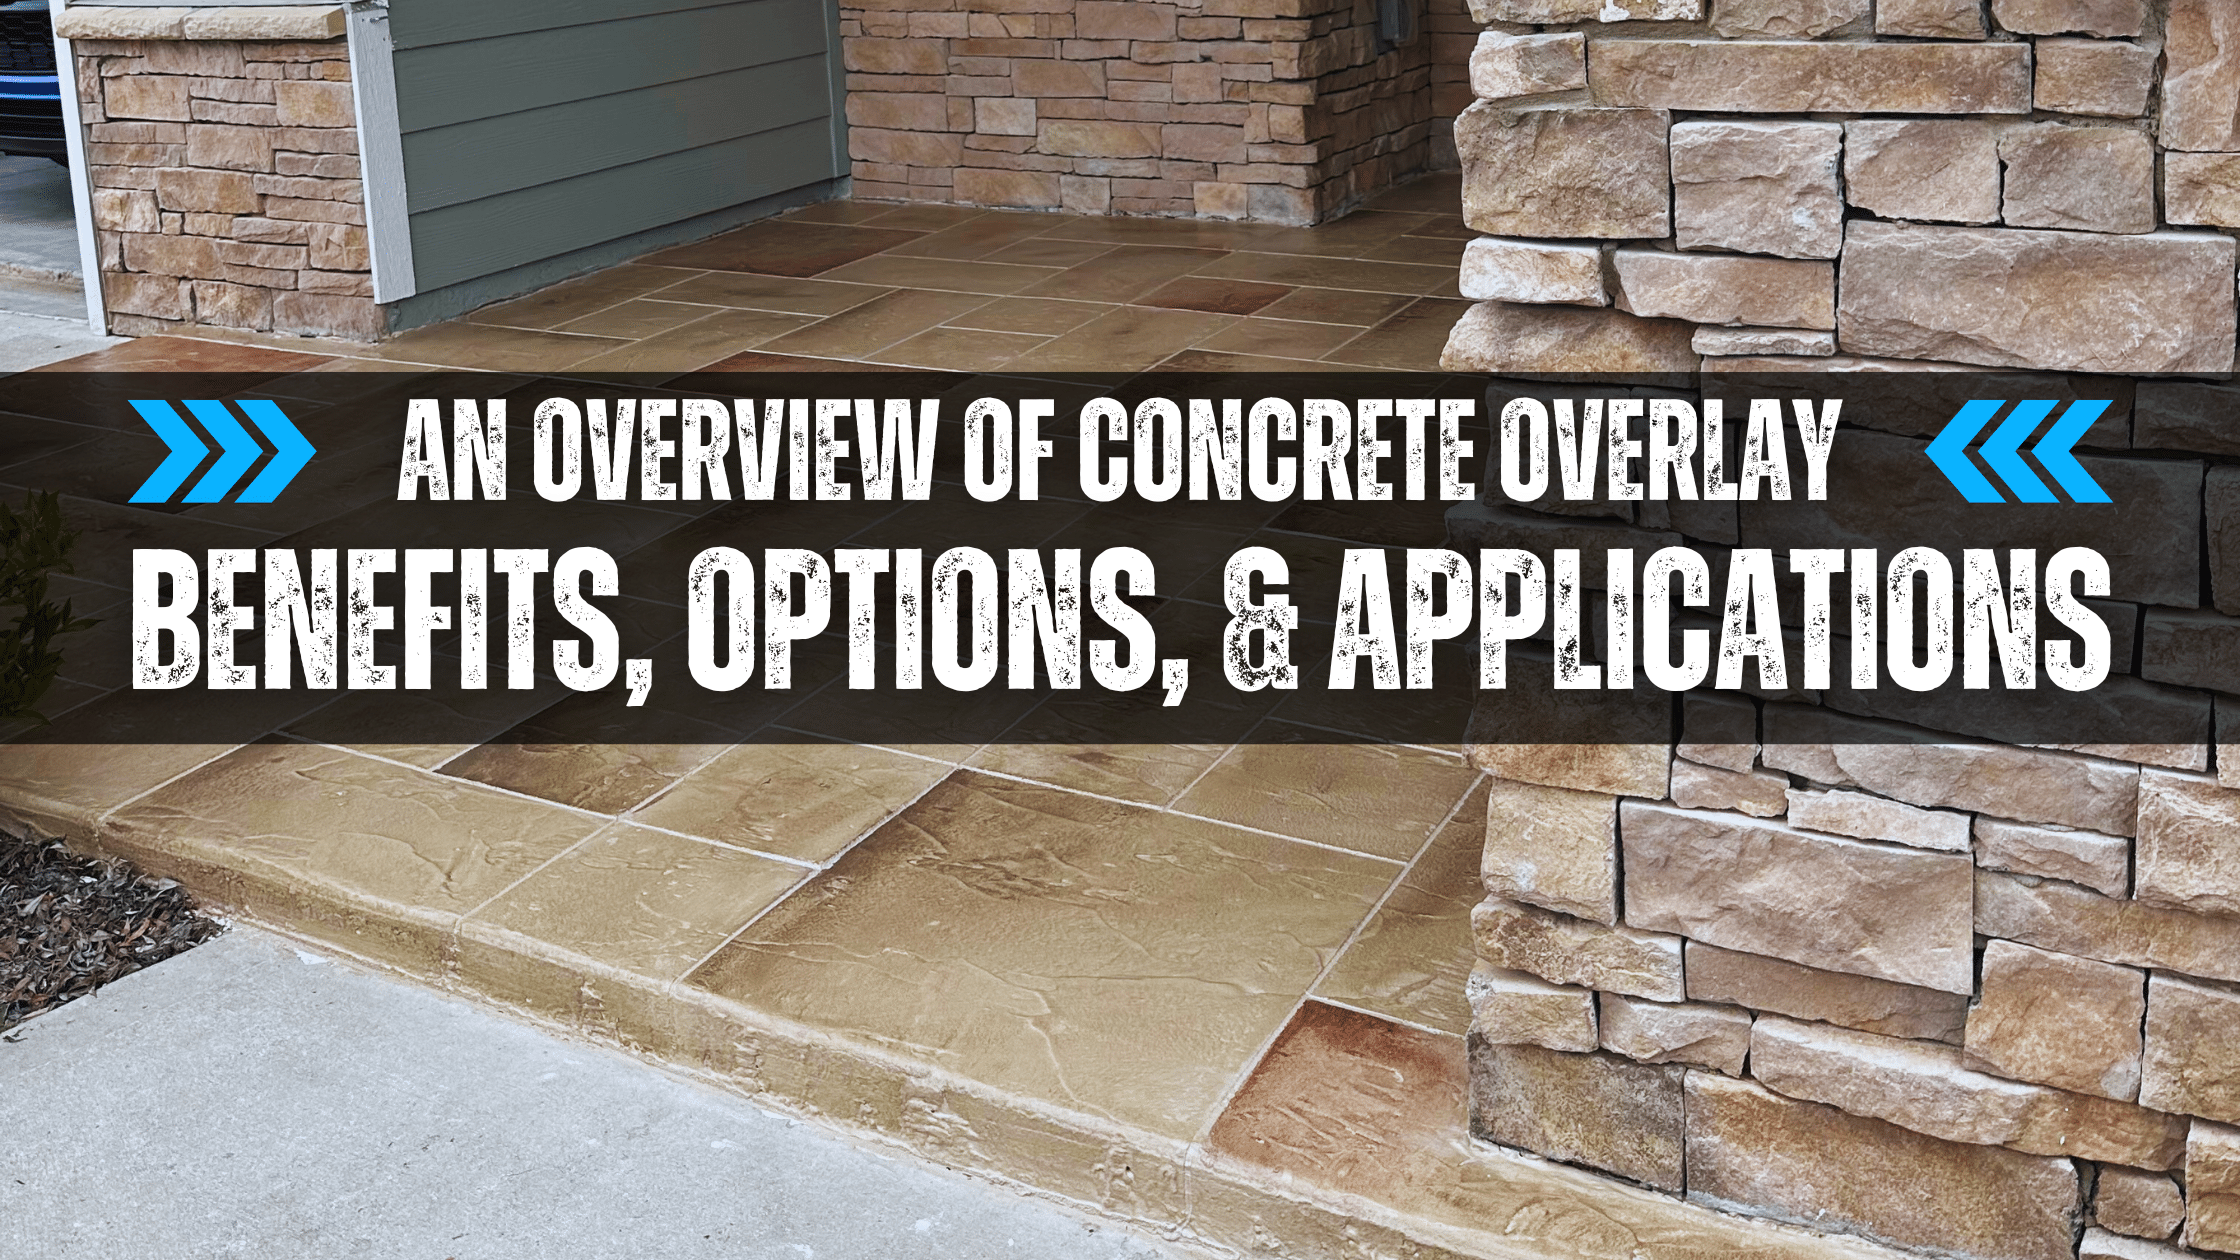 A summary of the benefits, options, and application of concrete overlay designs.